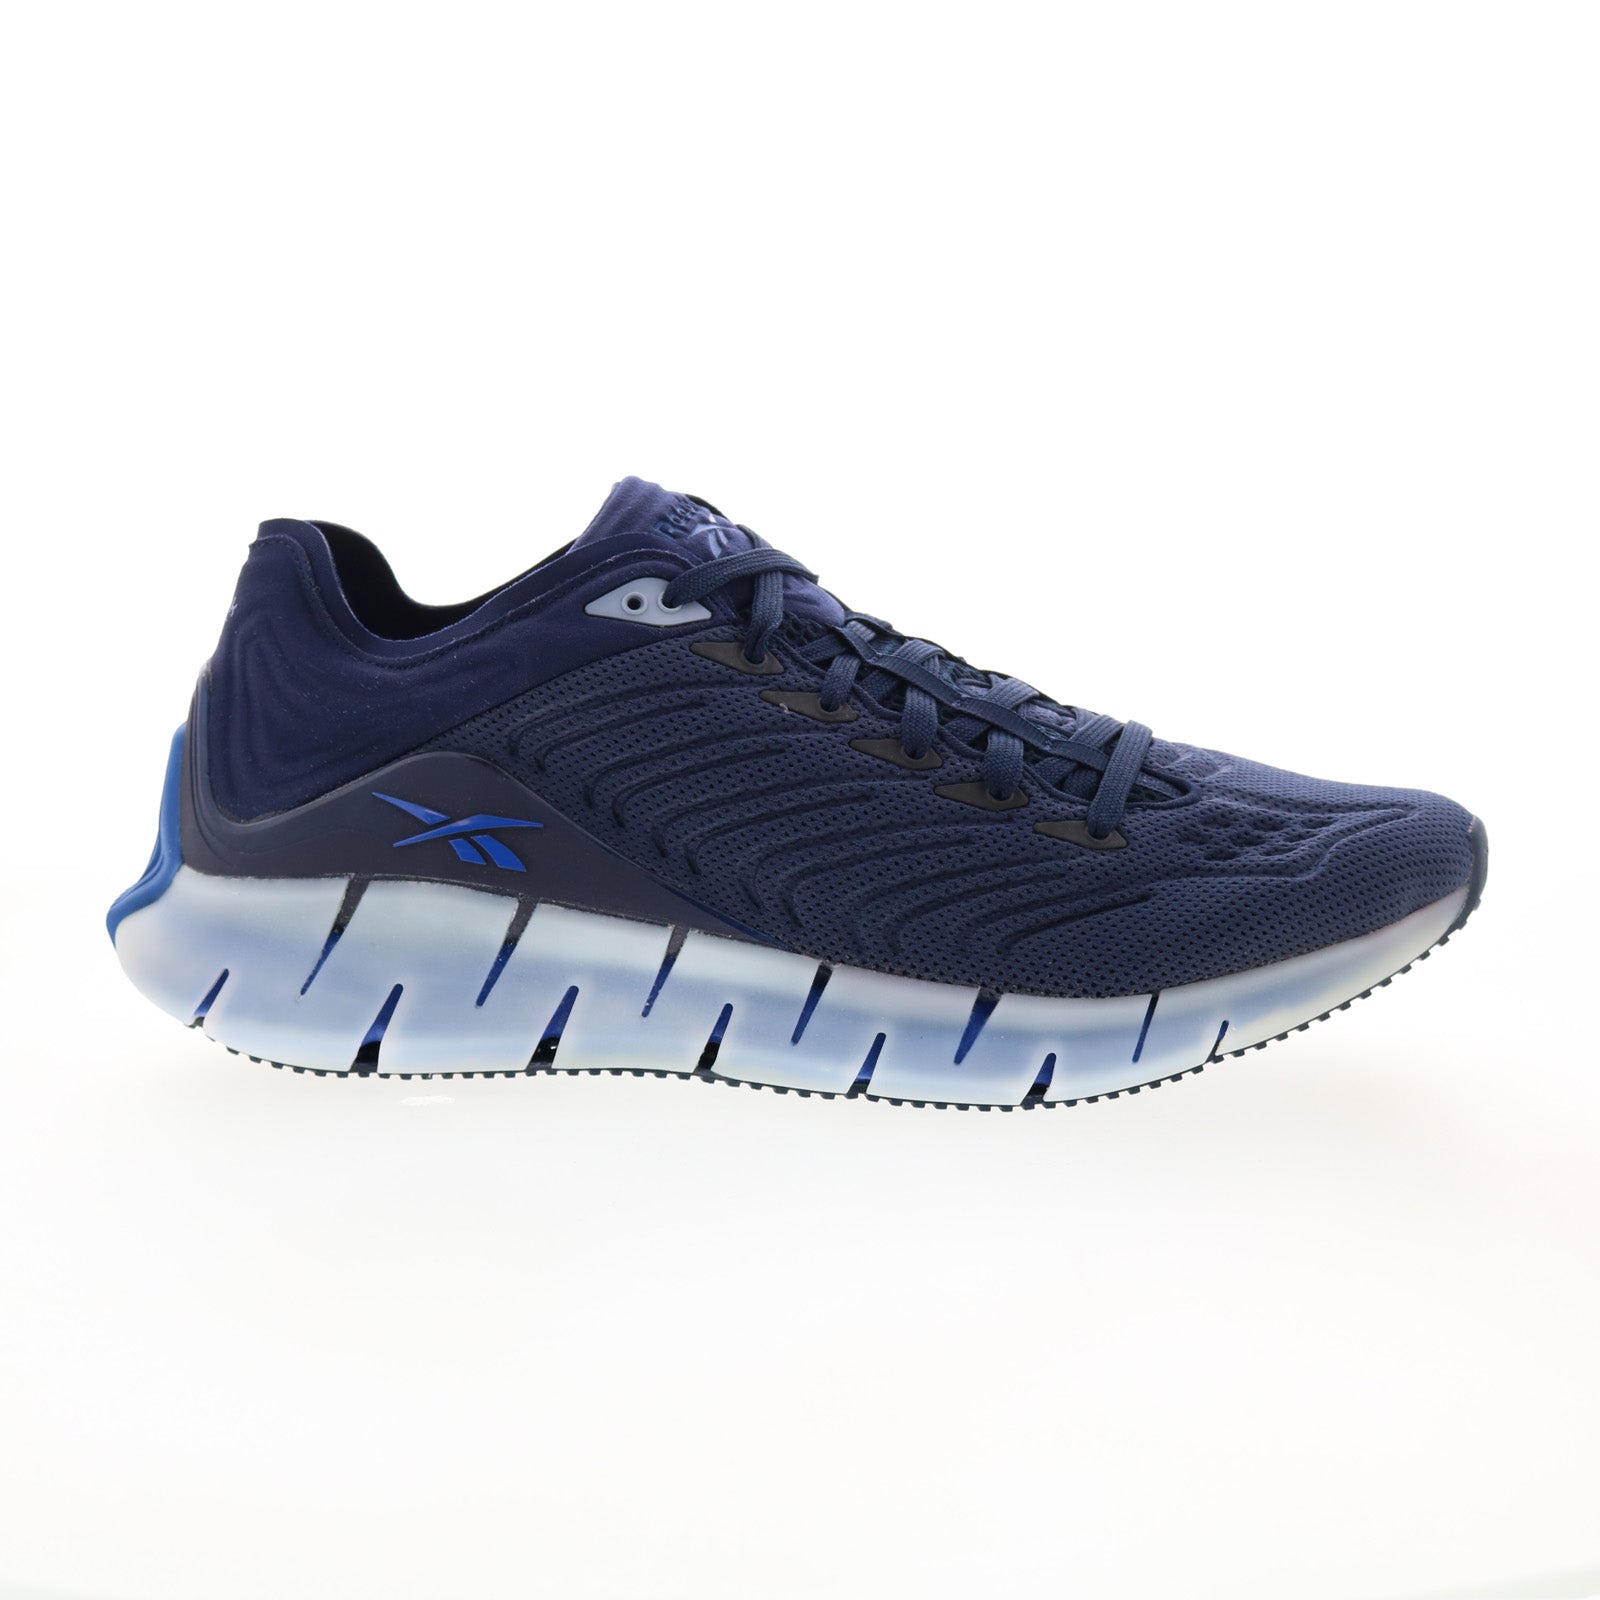 Reebok Zig Kinetica FW5292 Mens Blue Canvas Athletic Running Shoes - Ruze  Shoes